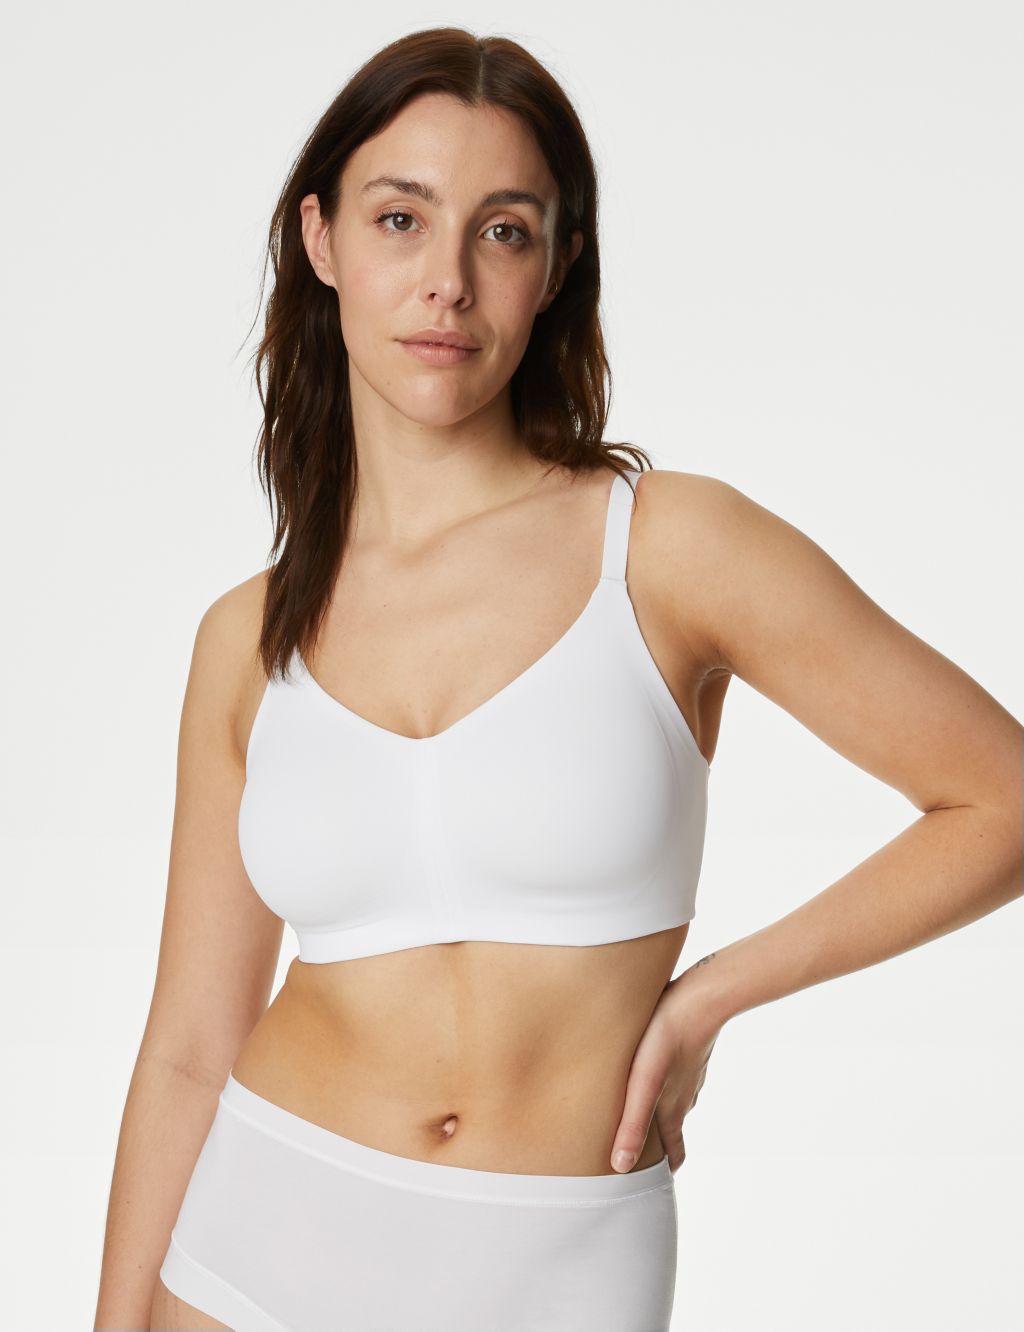 Flexifit™ Non-Wired Full Cup Bra F-H image 3